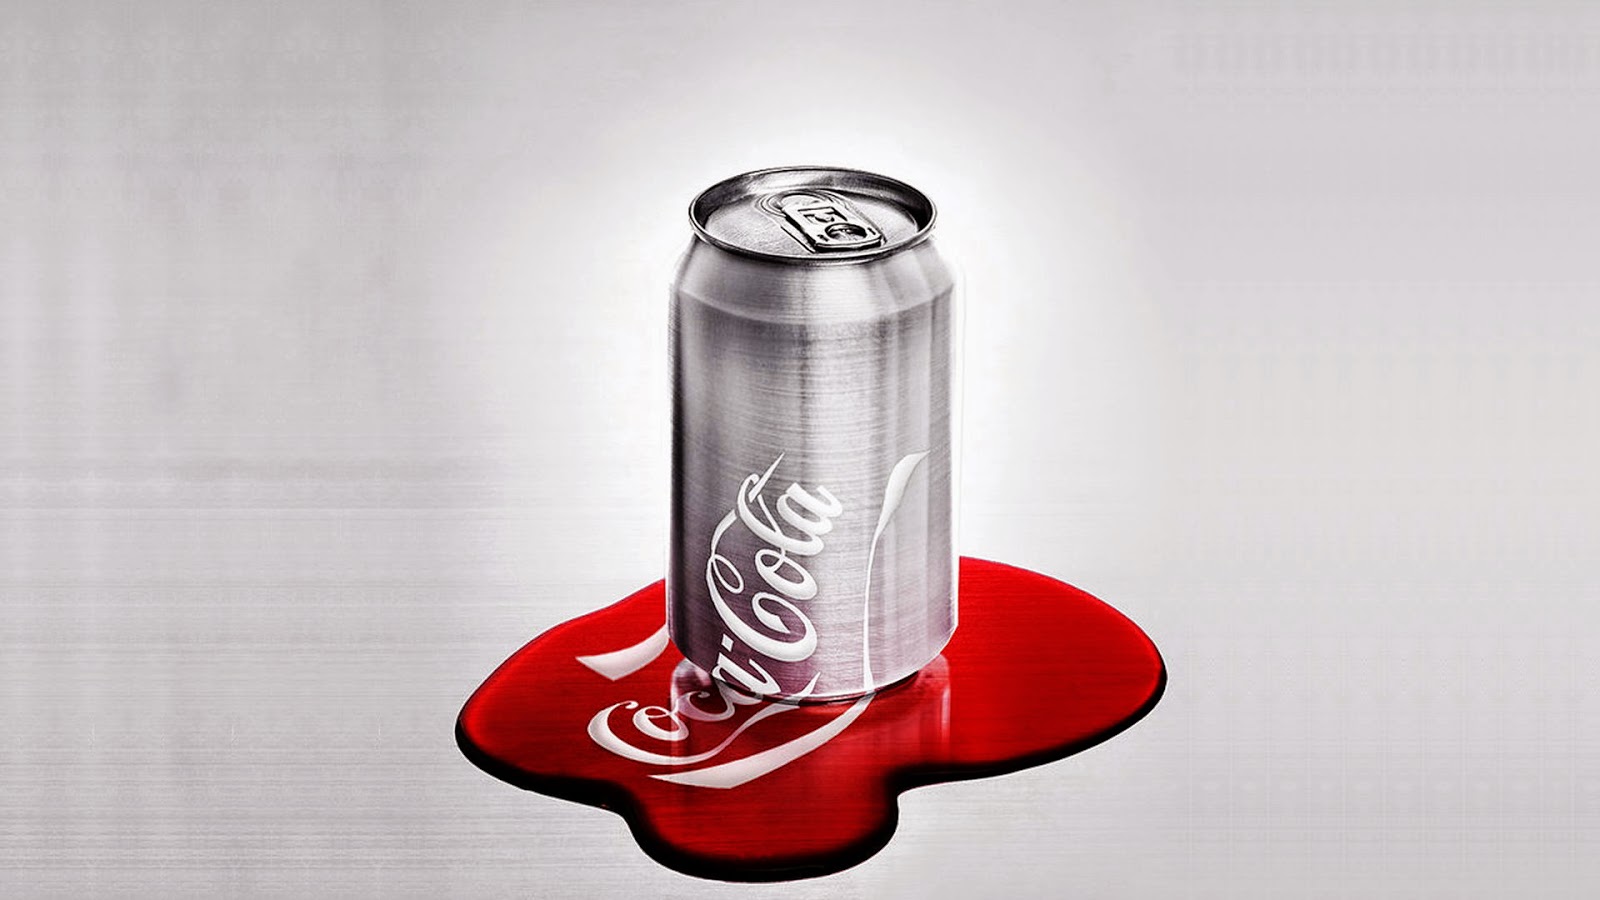 cola wallpaper,beverage can,aluminum can,coca cola,cola,carbonated soft drinks